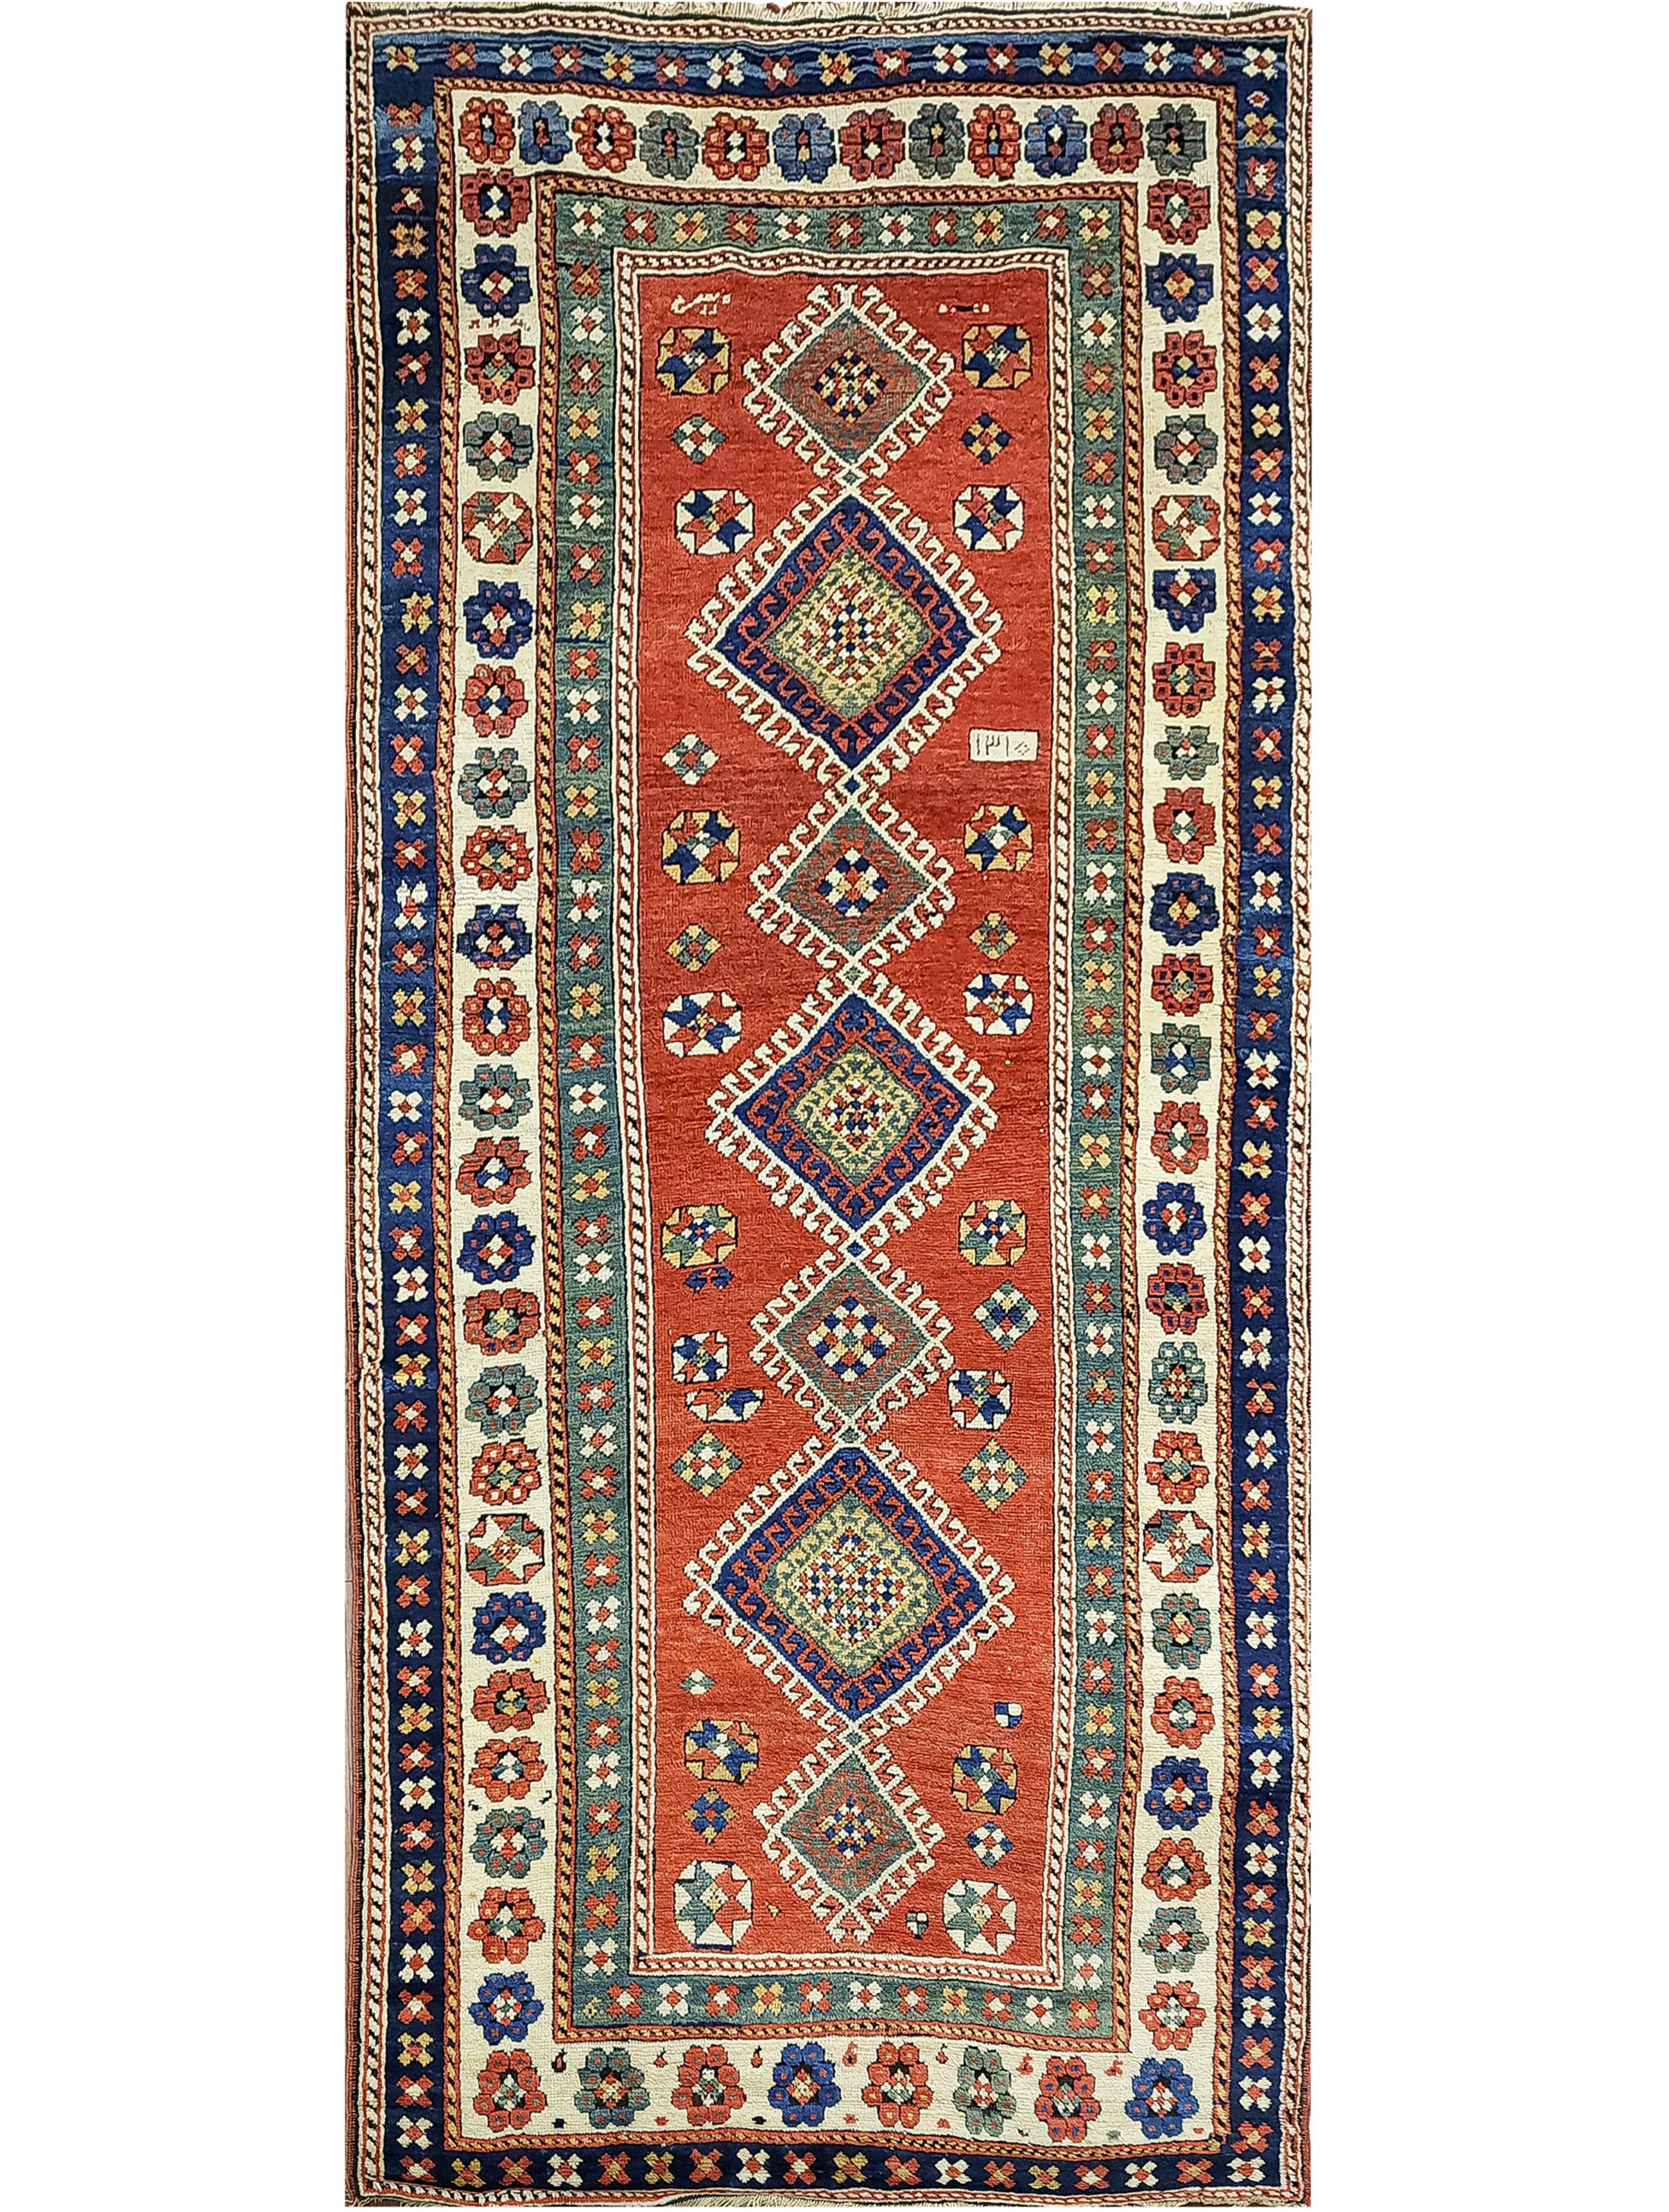 How much are authentic Persian rugs?